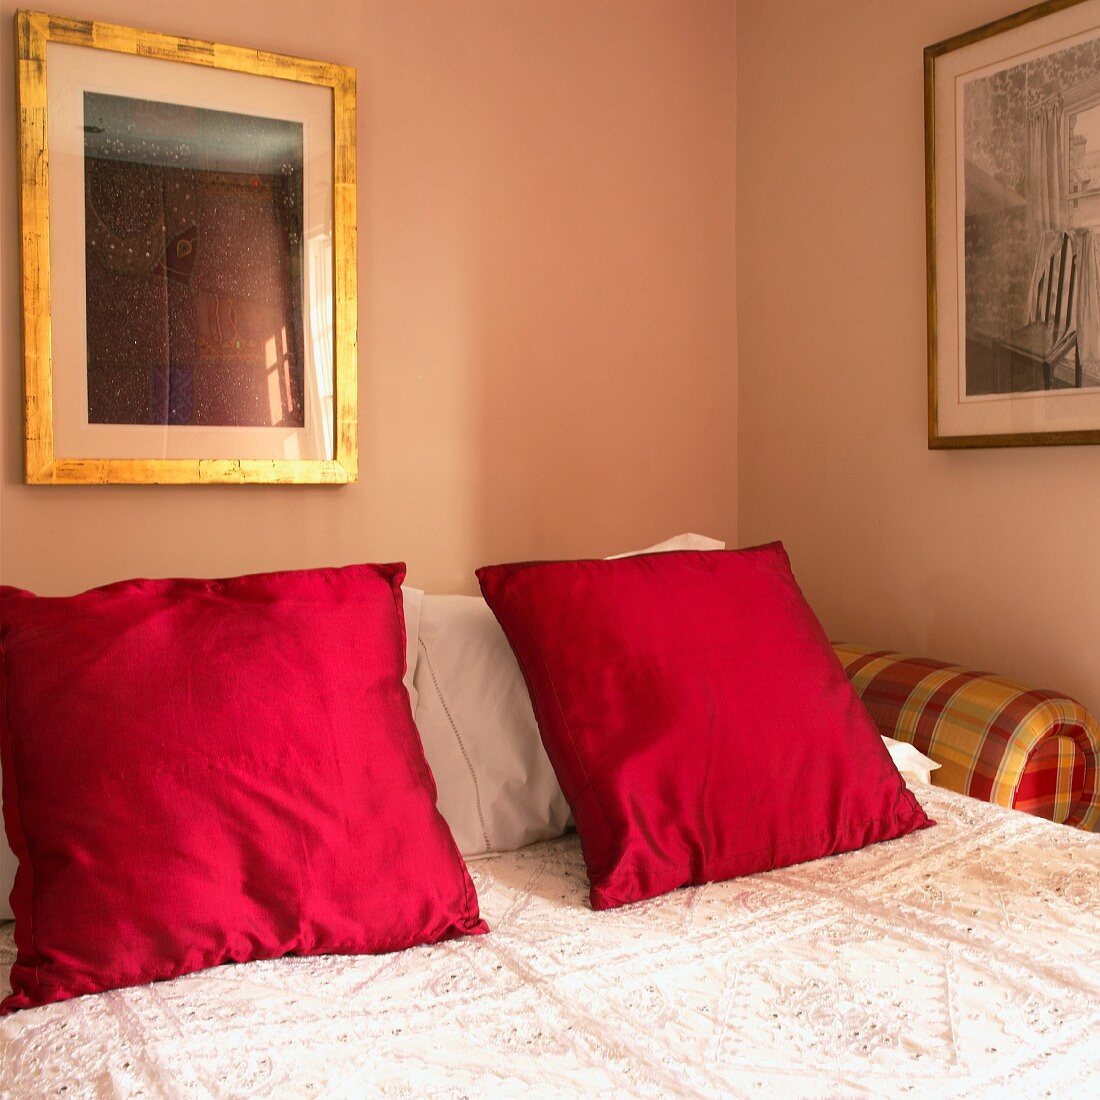 Double bed with red pillows and bedspread (close up)